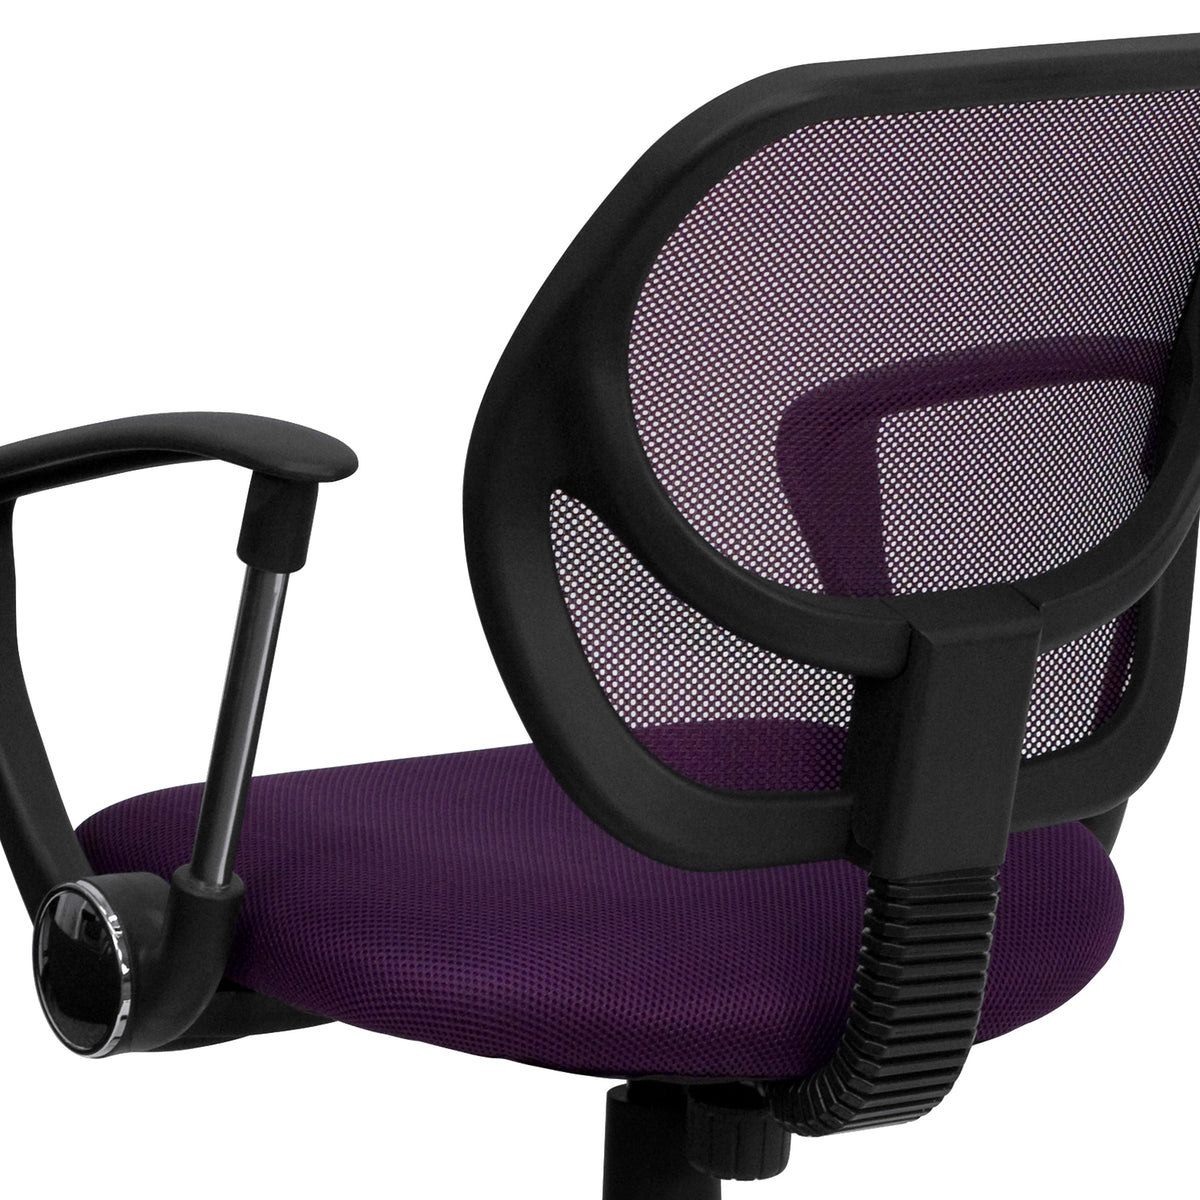 Purple |#| Low Back Purple Mesh Back Adjustable Height Swivel Task Office Chair with Arms